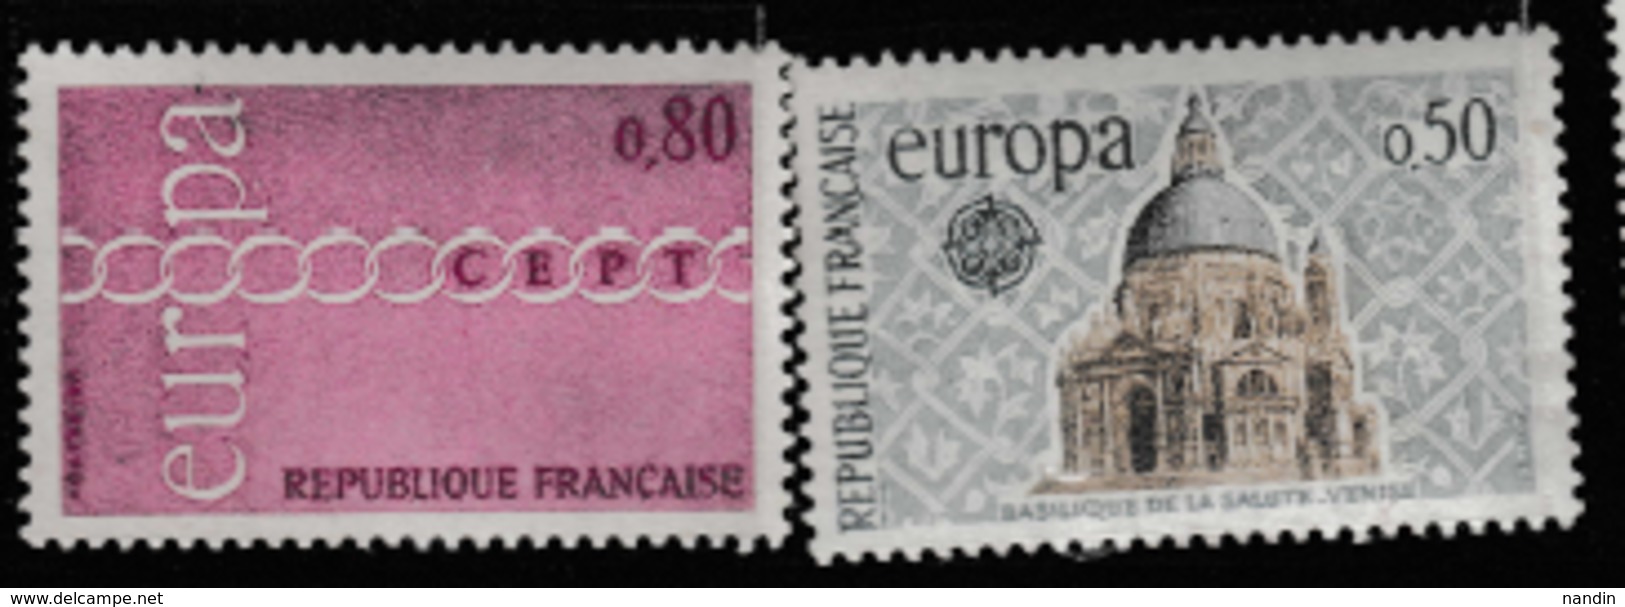 1971 MINT STAMP  ON EUROPA CEPT FRATERNITY & COOPERATION  FROM FRANCE - 1971